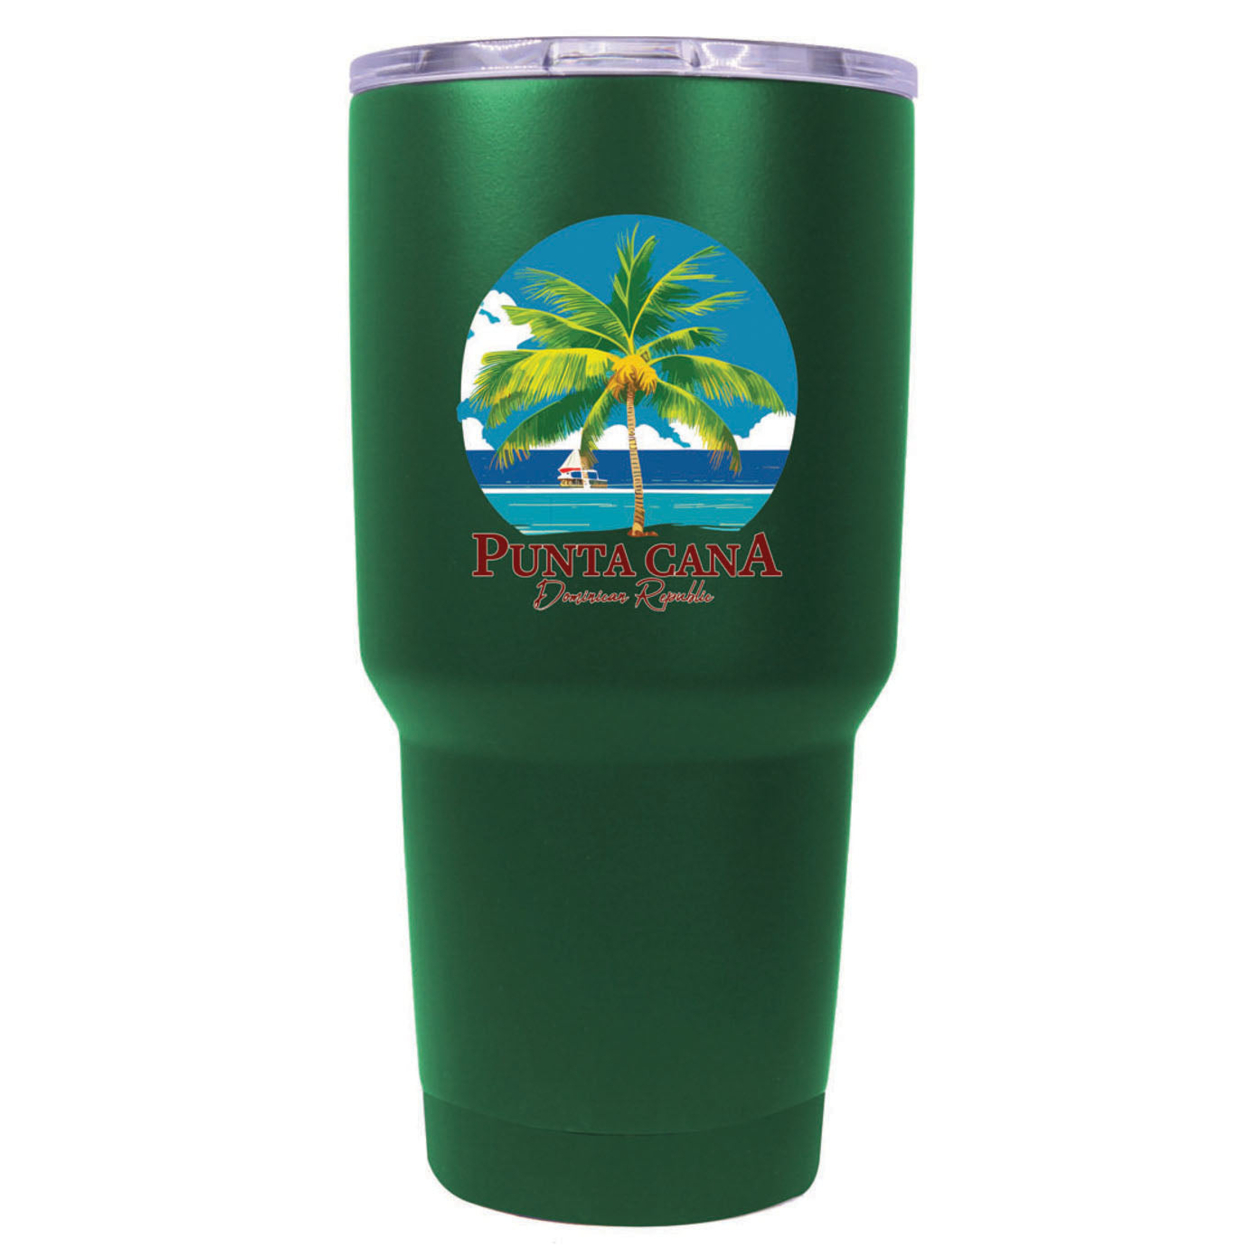 Punta Cana Dominican Republic Souvenir 24 Oz Insulated Stainless Steel Tumbler - Black, PARROT